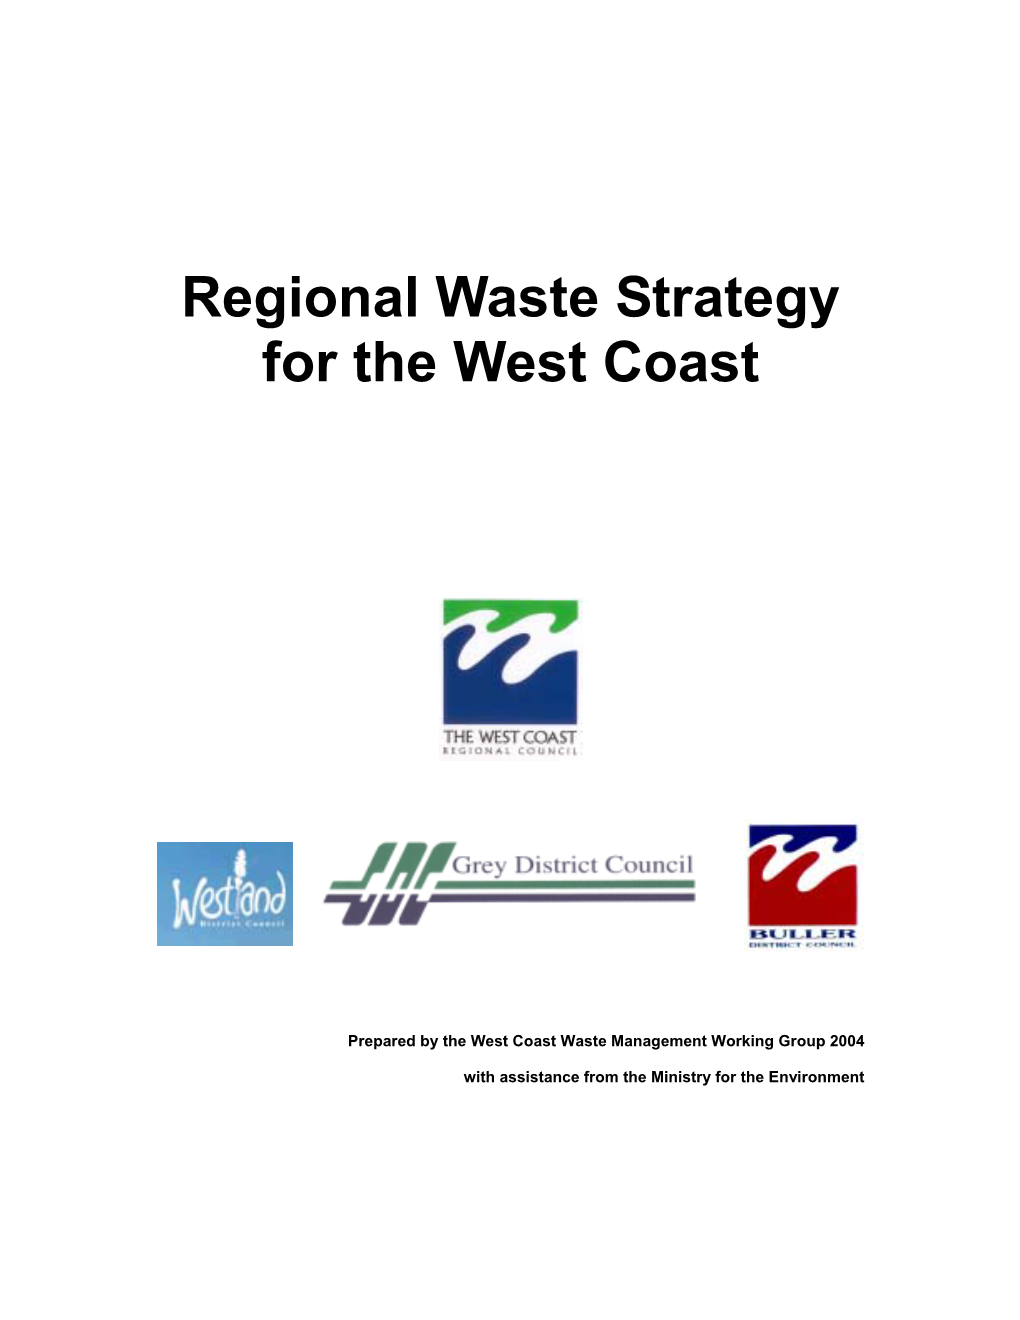 Regional Waste Strategy for the West Coast